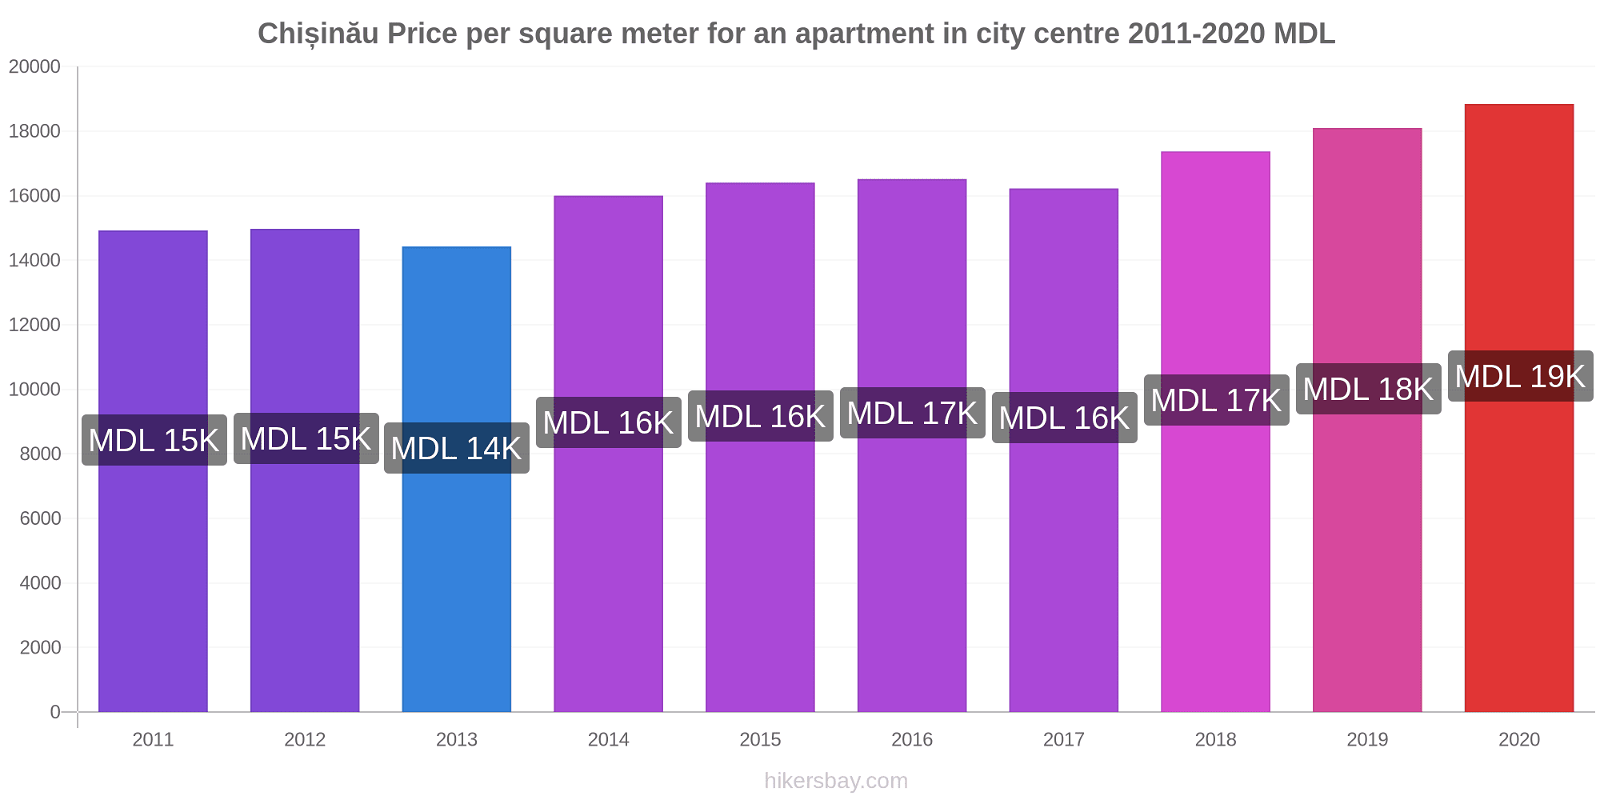 Chișinău price changes Price per square meter for an apartment in city centre hikersbay.com